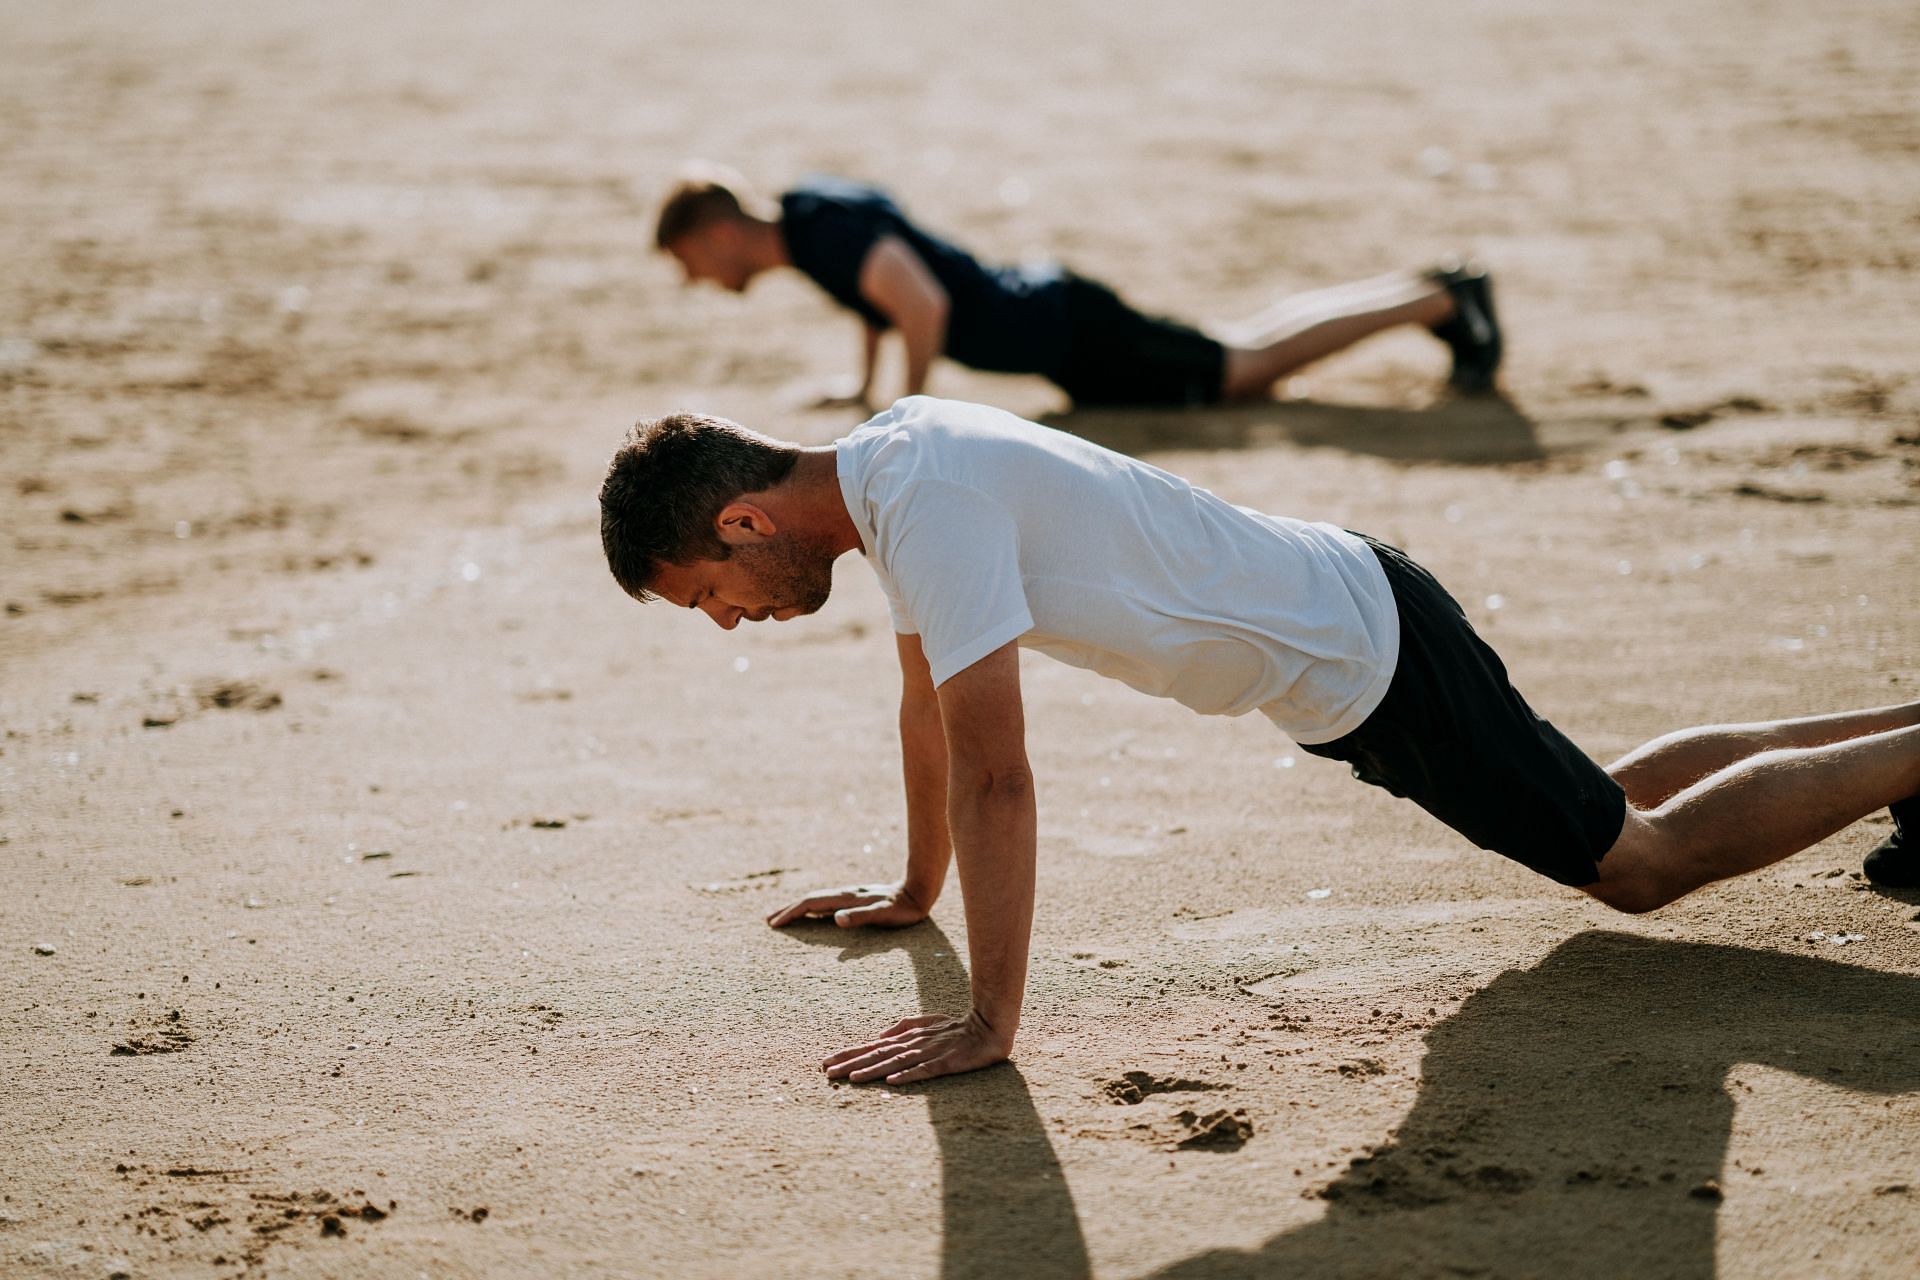 Plank is one of the best ways to strengthen and tighten your core. (Image via Unsplash / Annie Spratt)